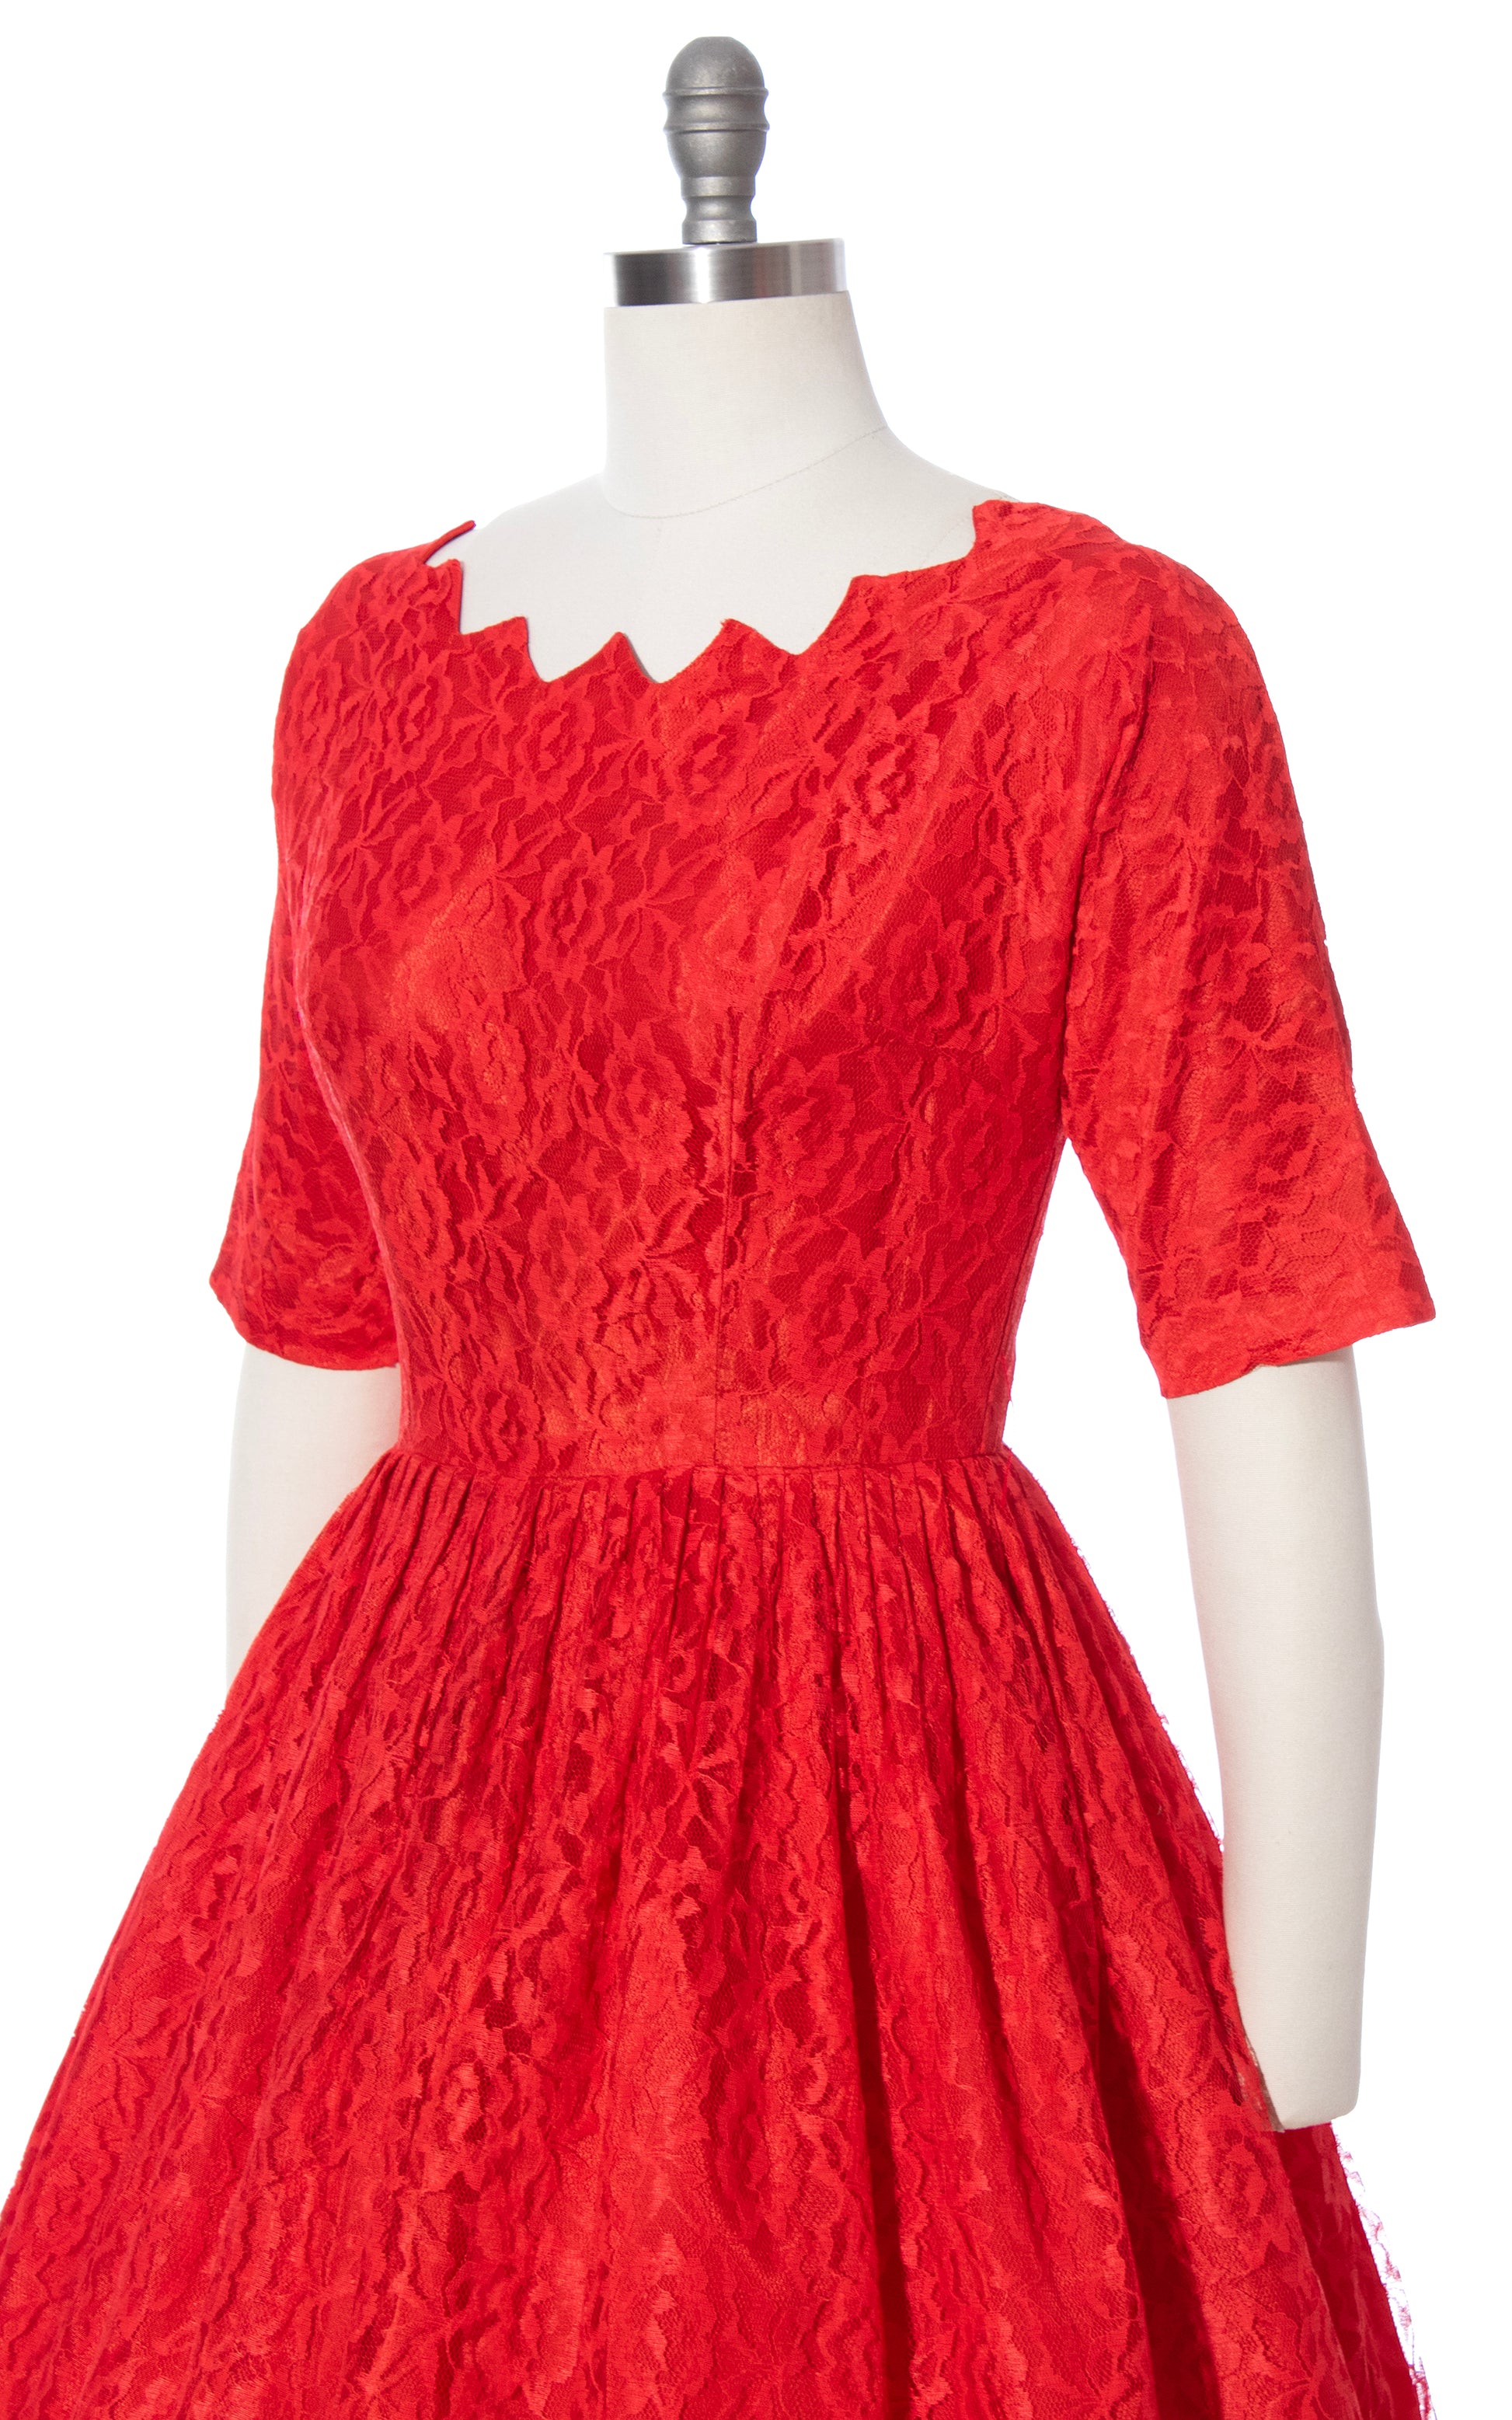 Vintage 50s 1950s Zig Zag Red Lace Party Dress Birthday Life Vintage